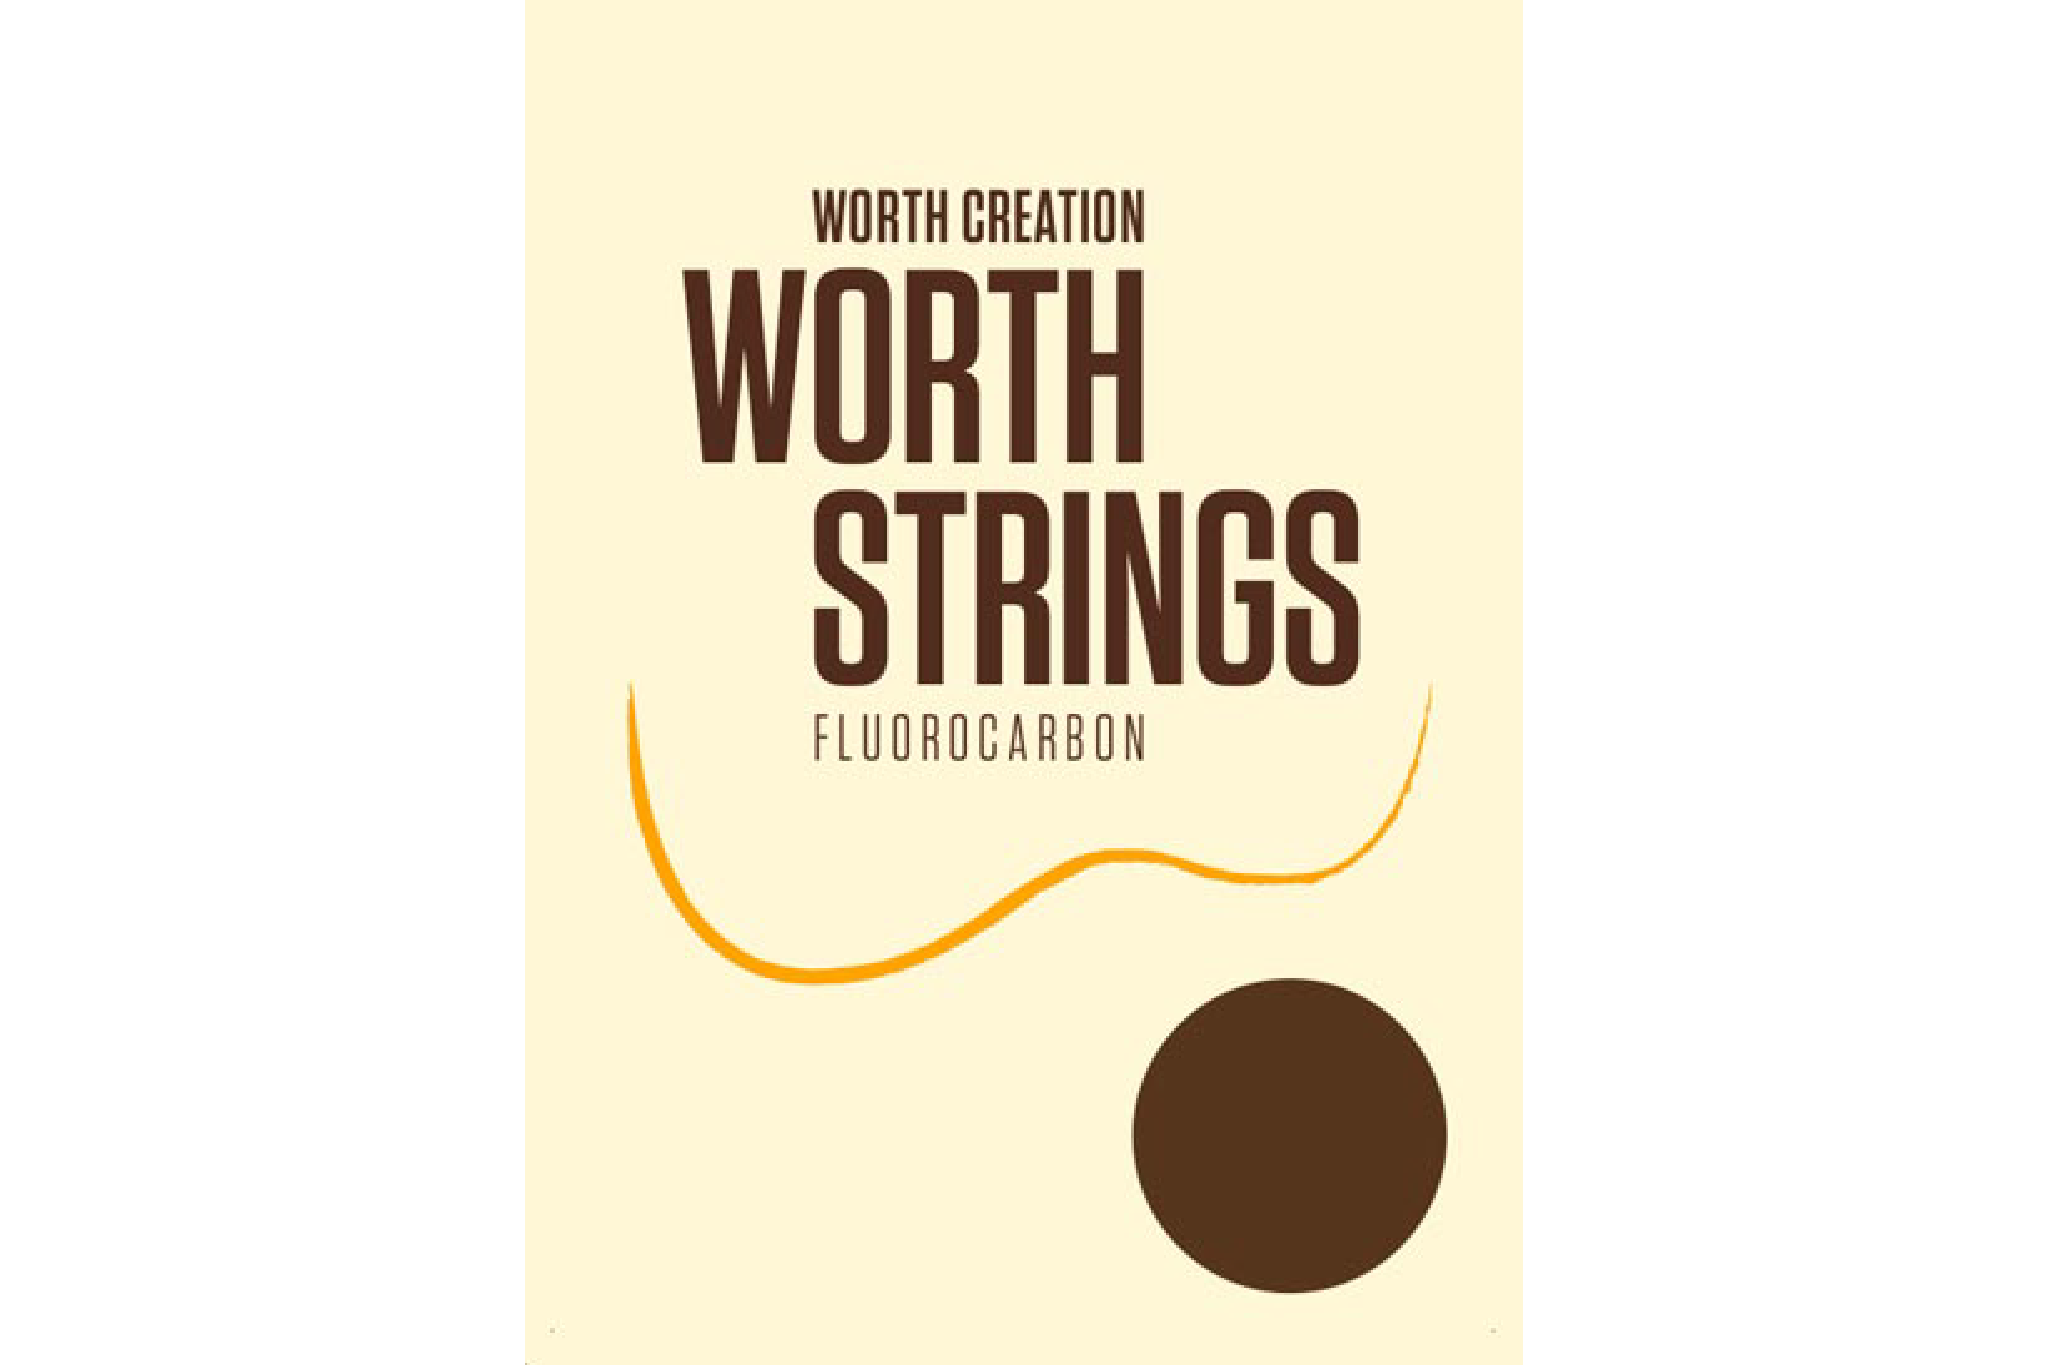 Worth Brown Fluorocarbon Tenor LOW G Ukulele Strings BT-LG 63 (G-C-E-A) Enough For 2 Sets